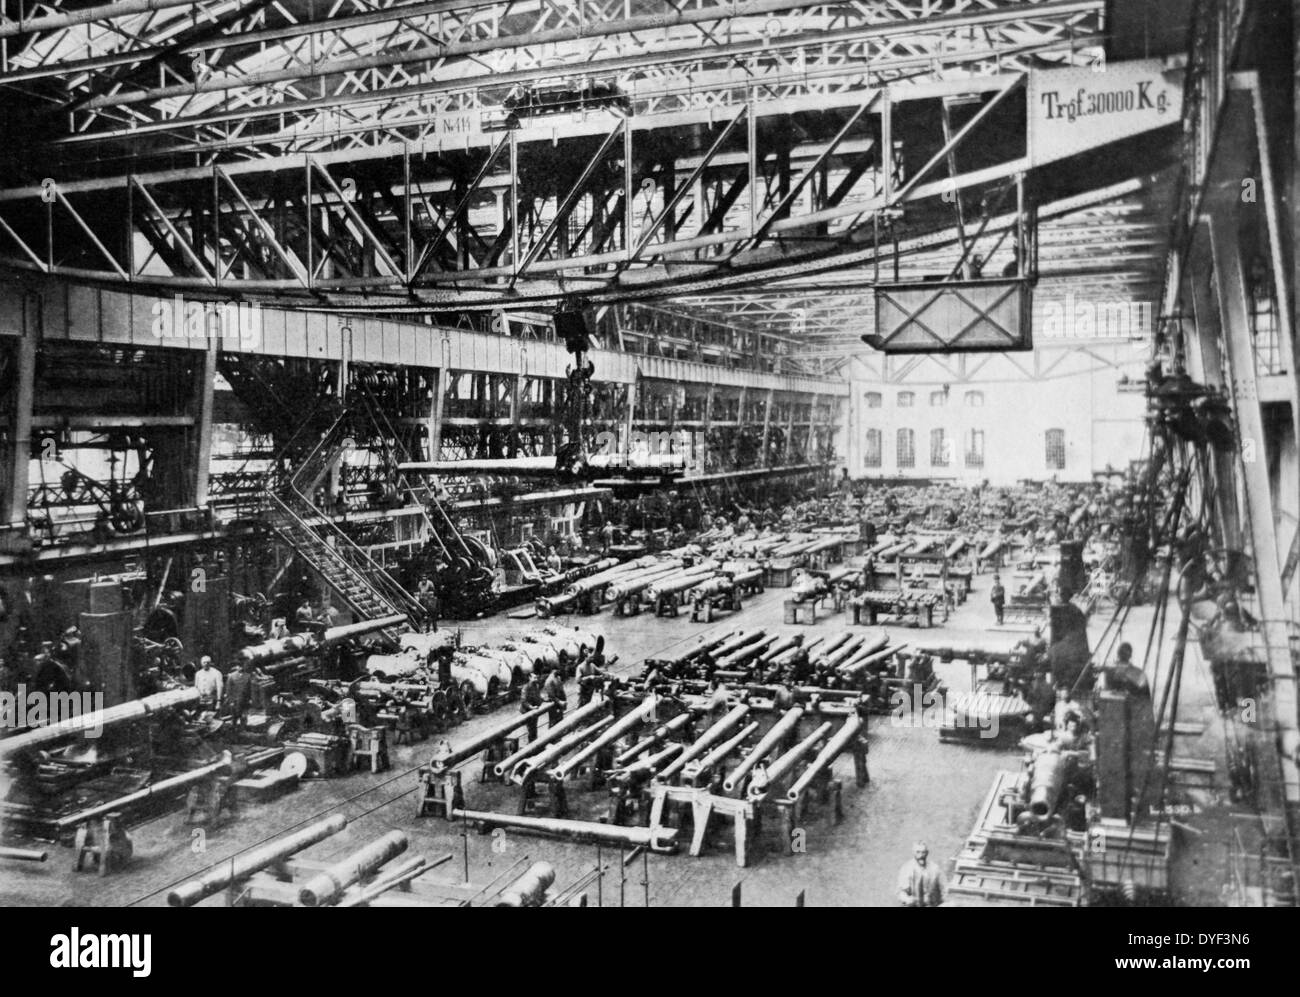 Photo of Krupp works in Germany, showing shop floor workers manufacturing big guns. First World War. Circa 1914. Stock Photo